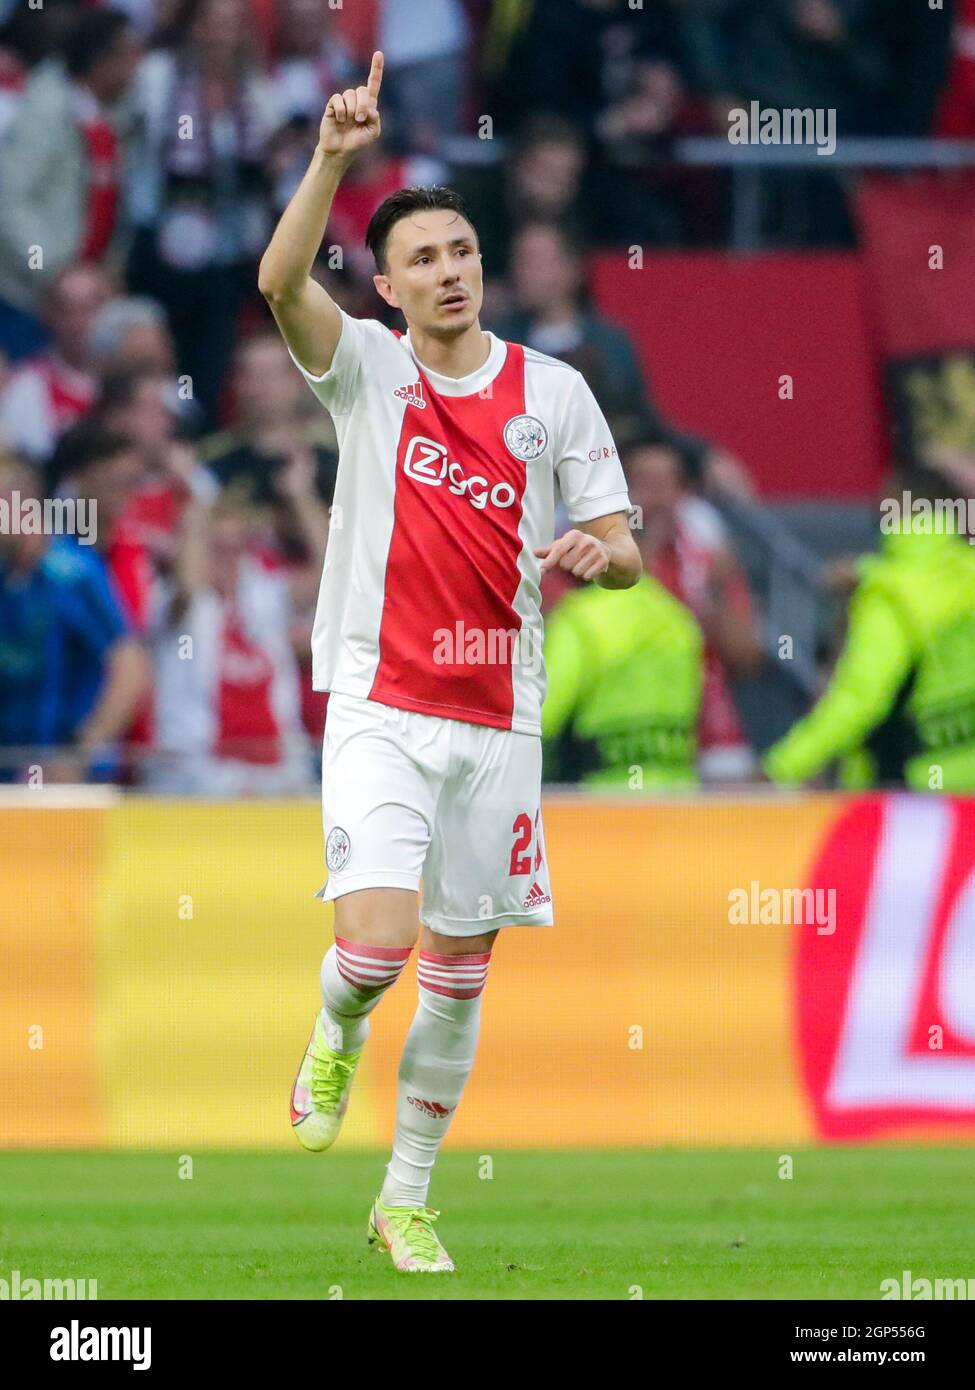 AMSTERDAM, NETHERLANDS - SEPTEMBER 28: Steven Berghuis of Ajax is  celebrating his goal during the UEFA Champions League Group stage match  between Ajax and Besiktas at Johan Cruijff ArenA on September 28,